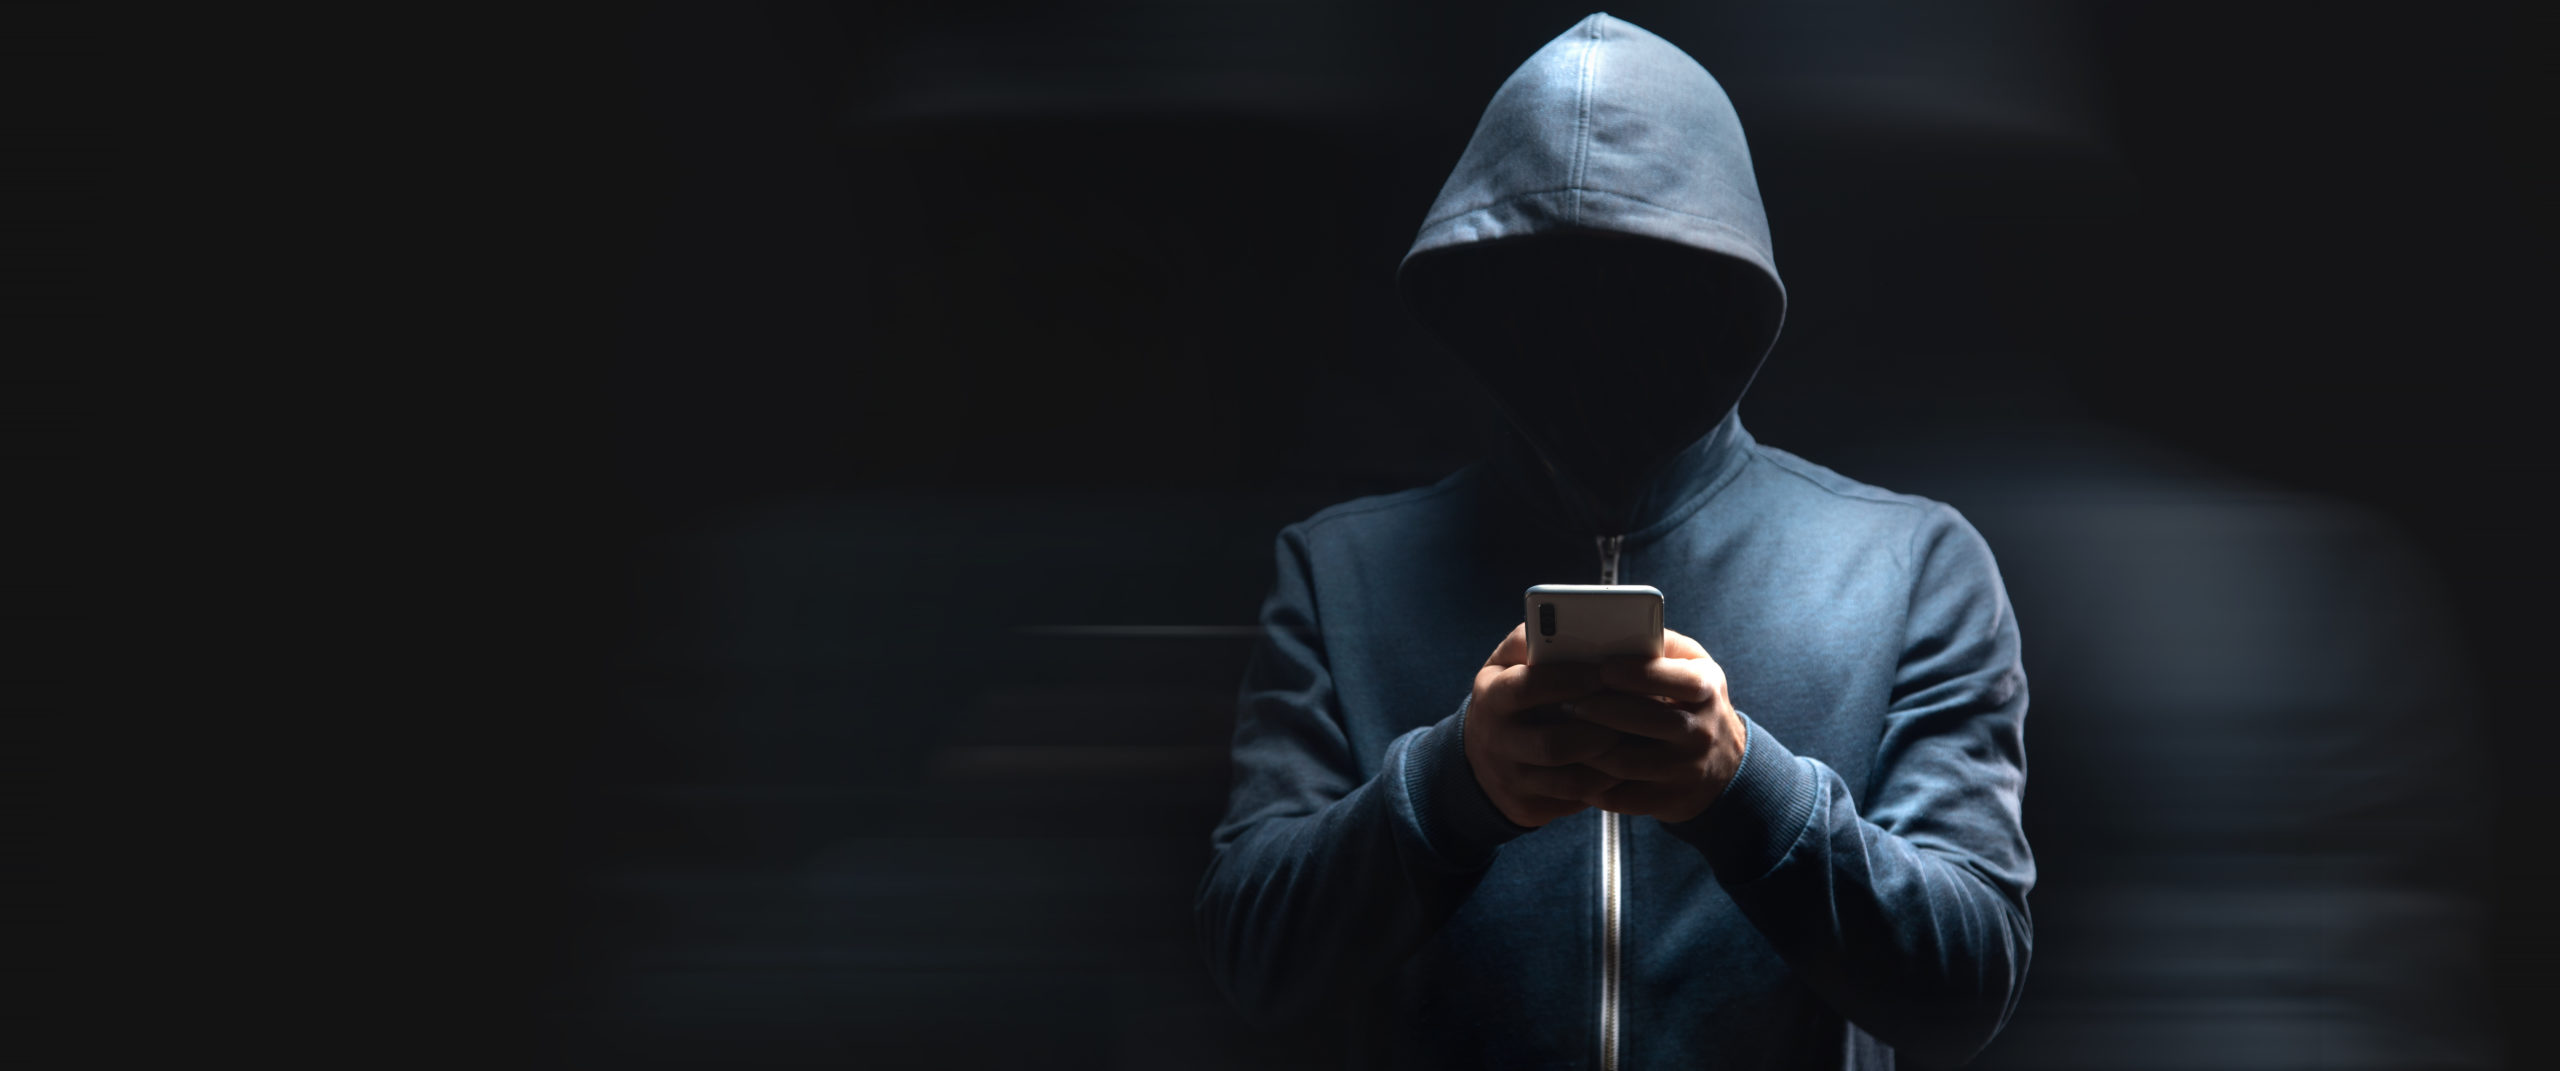 How to Secure Your Smartphone from Hackers